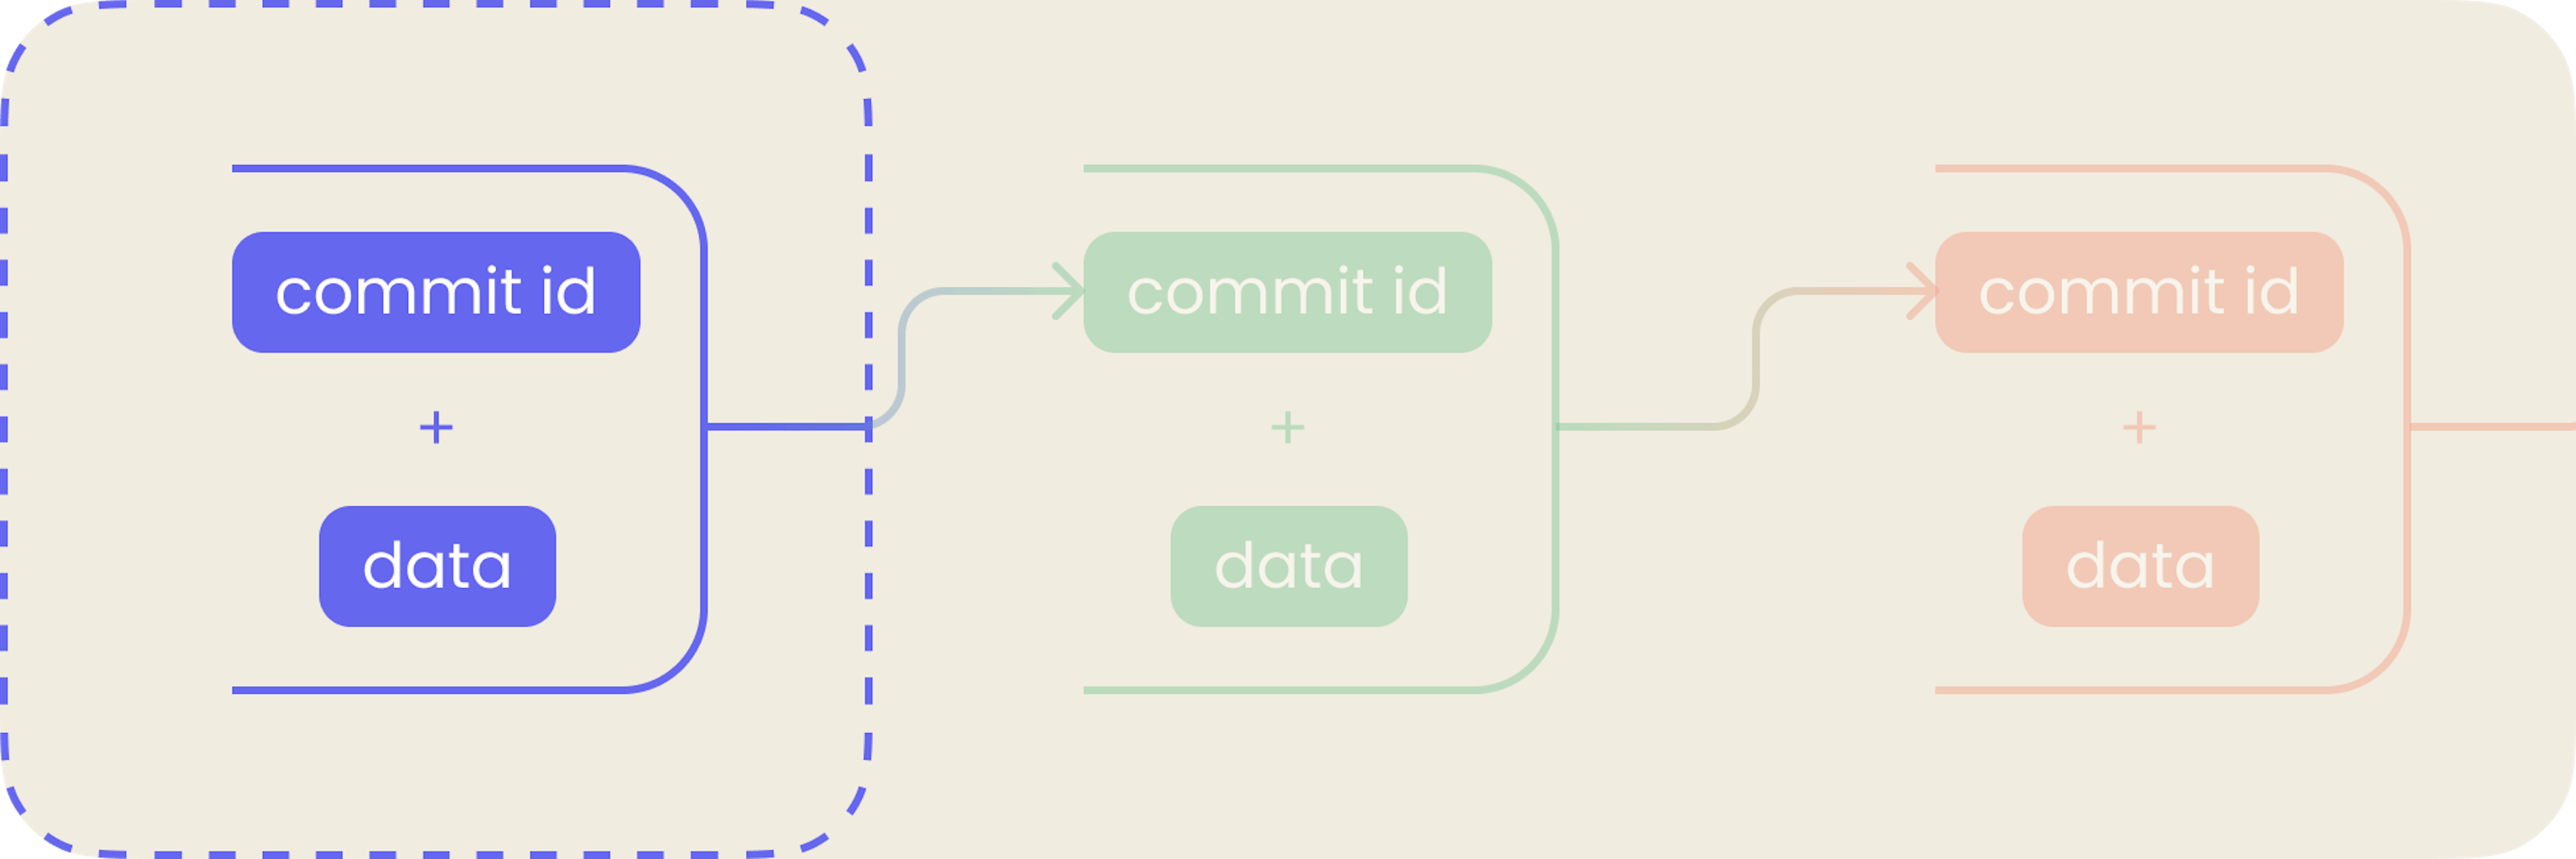 The identifier of the new commit is created from the data and the identifier of the previous commit